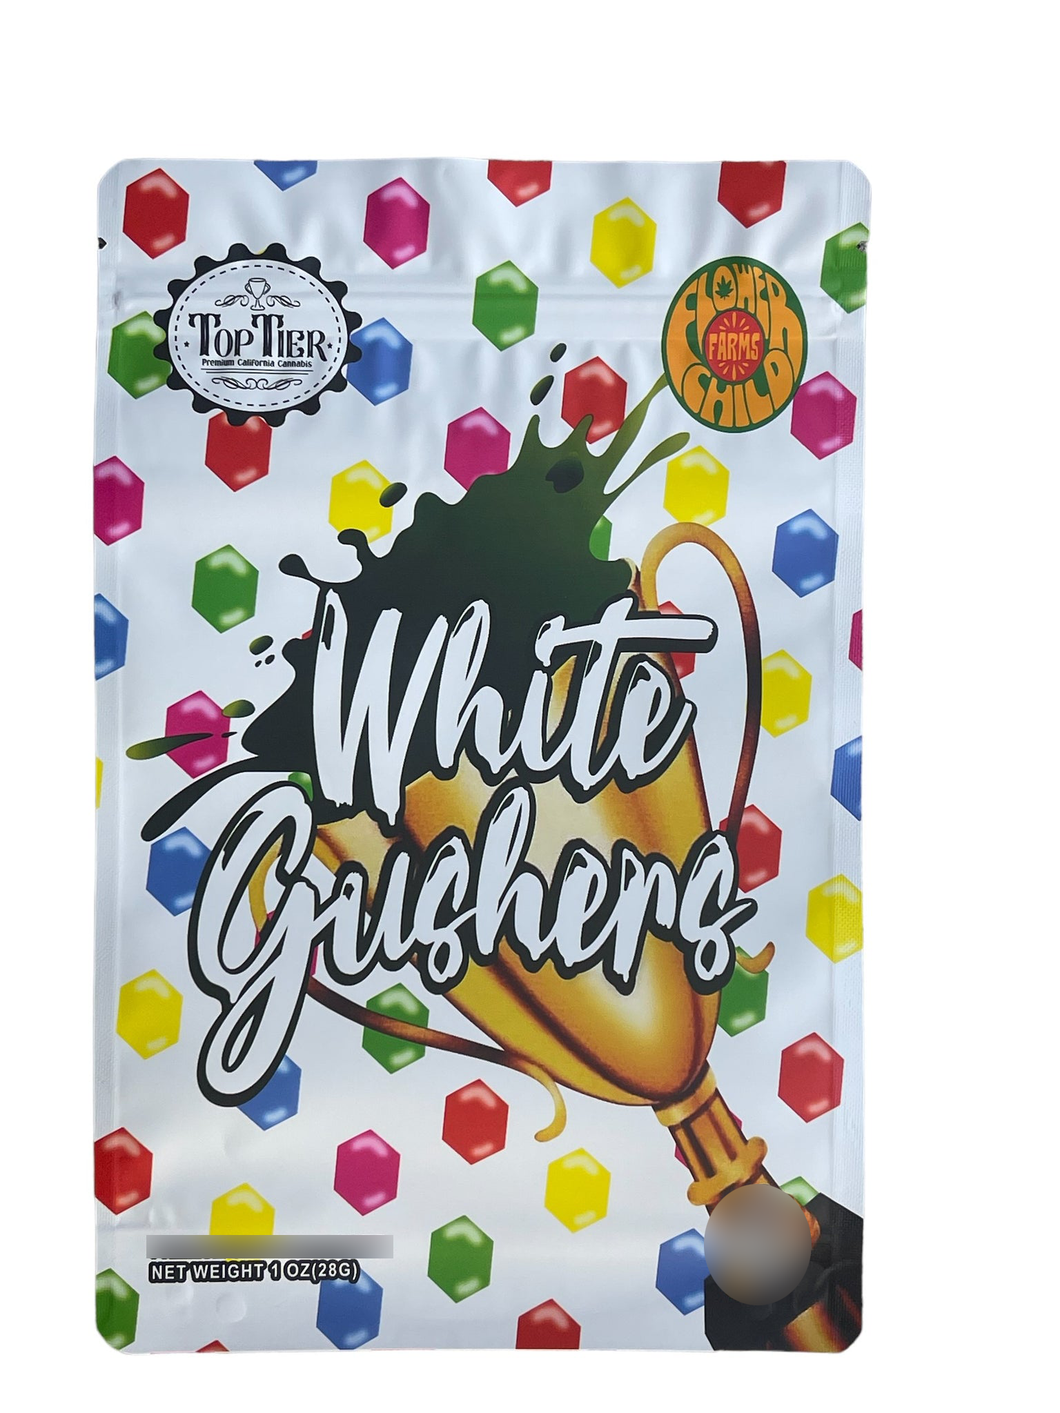 Top Tier White Gushers 1 OZ  28G Mylar empty Mylar bag 1 ounce (50 Count)